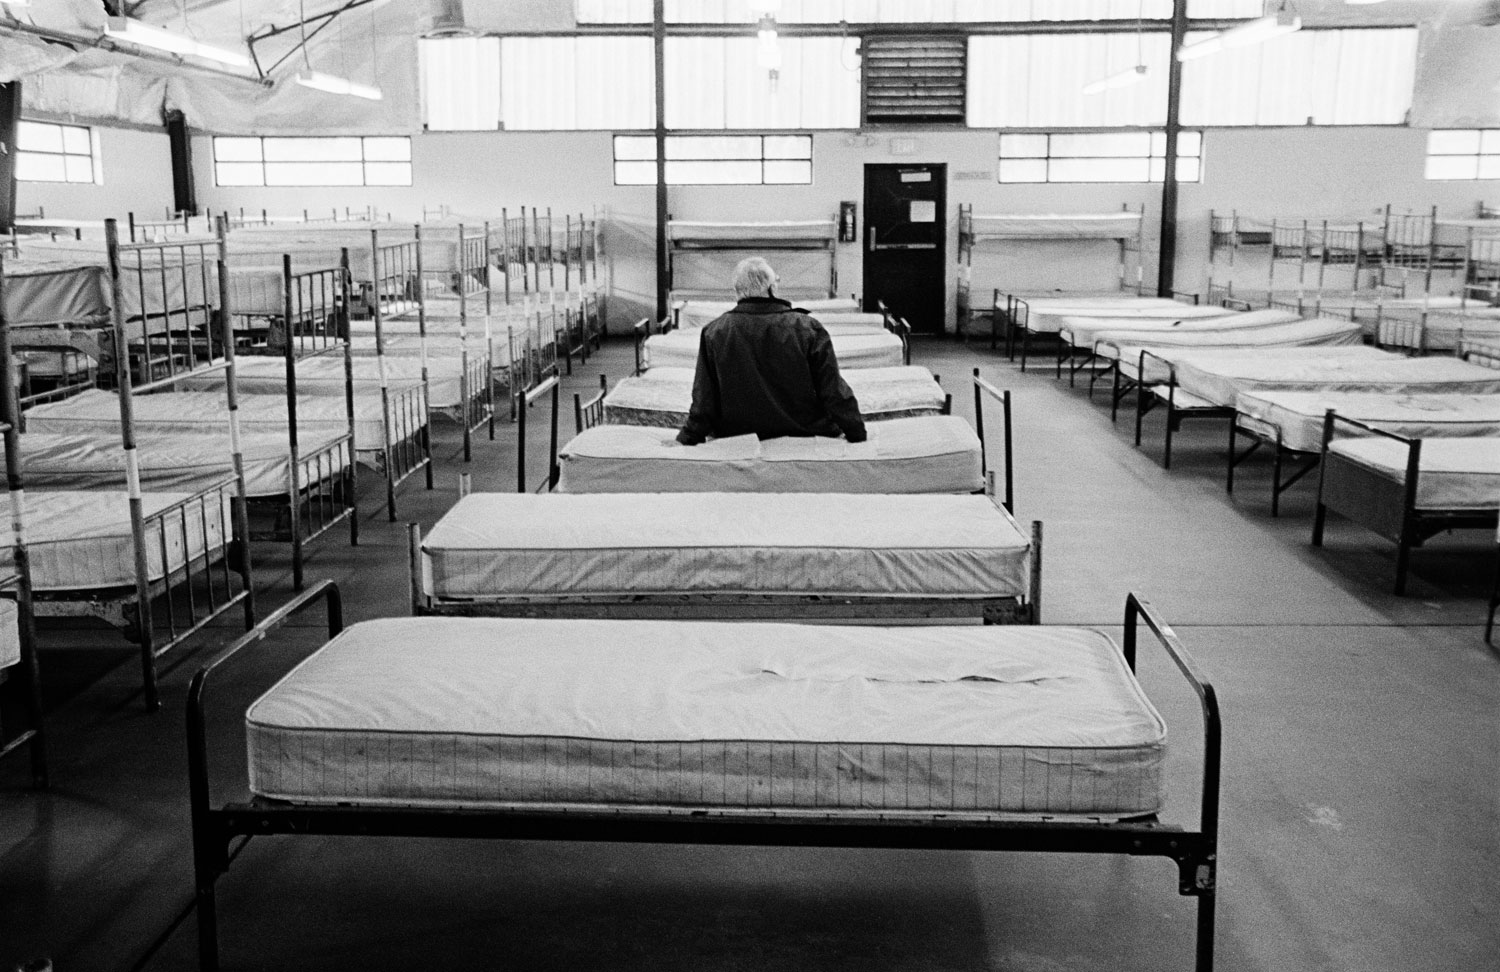 Jesse revisits the Stockton homeless shelter where he stayed several times upon his release from prison. Stockton, Calif., 2012.